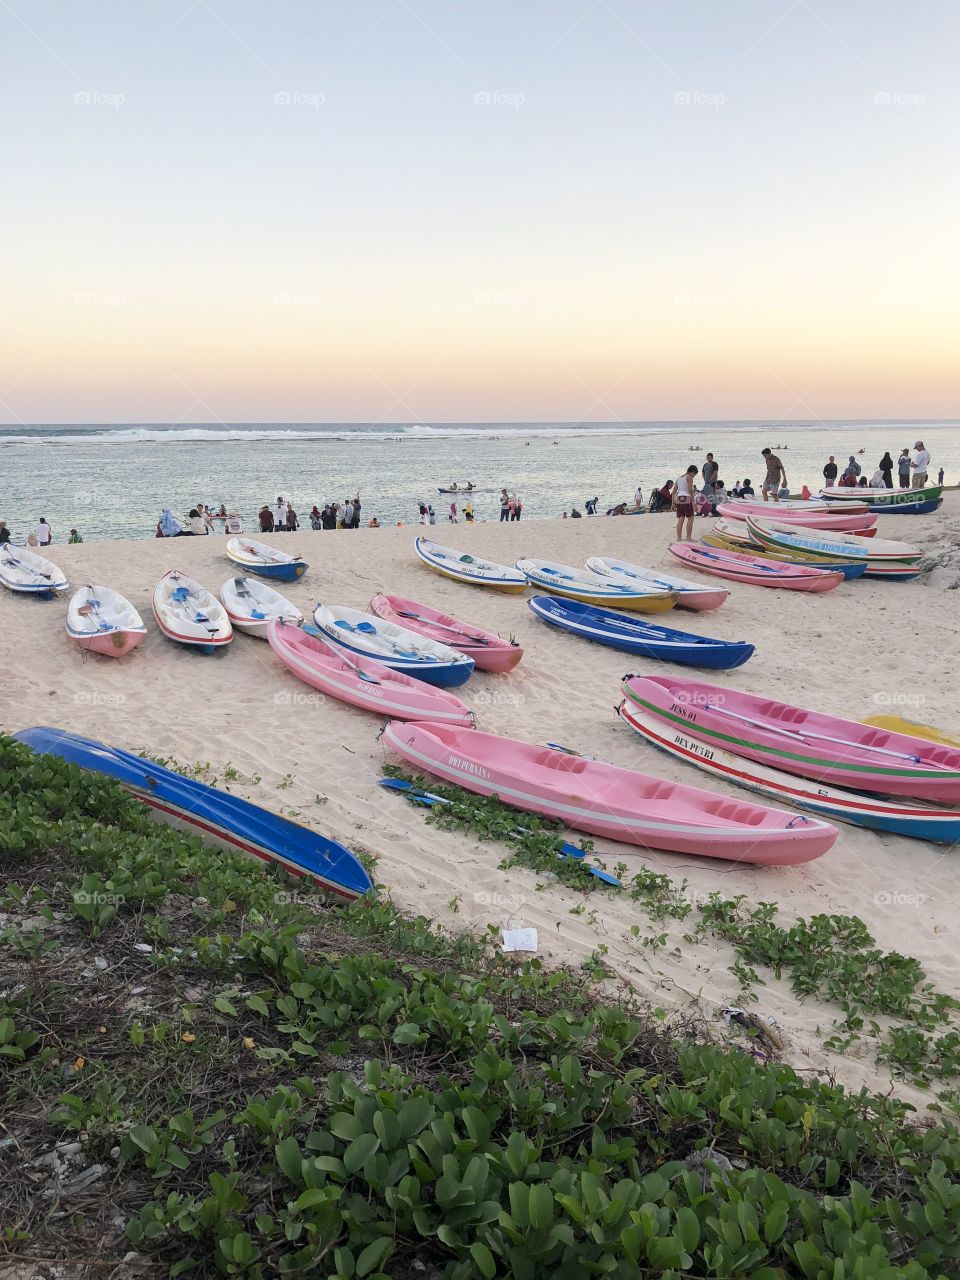 Pink and blue, beach canoes and kayaks at sunset. Portrait style. Taken August 2018.